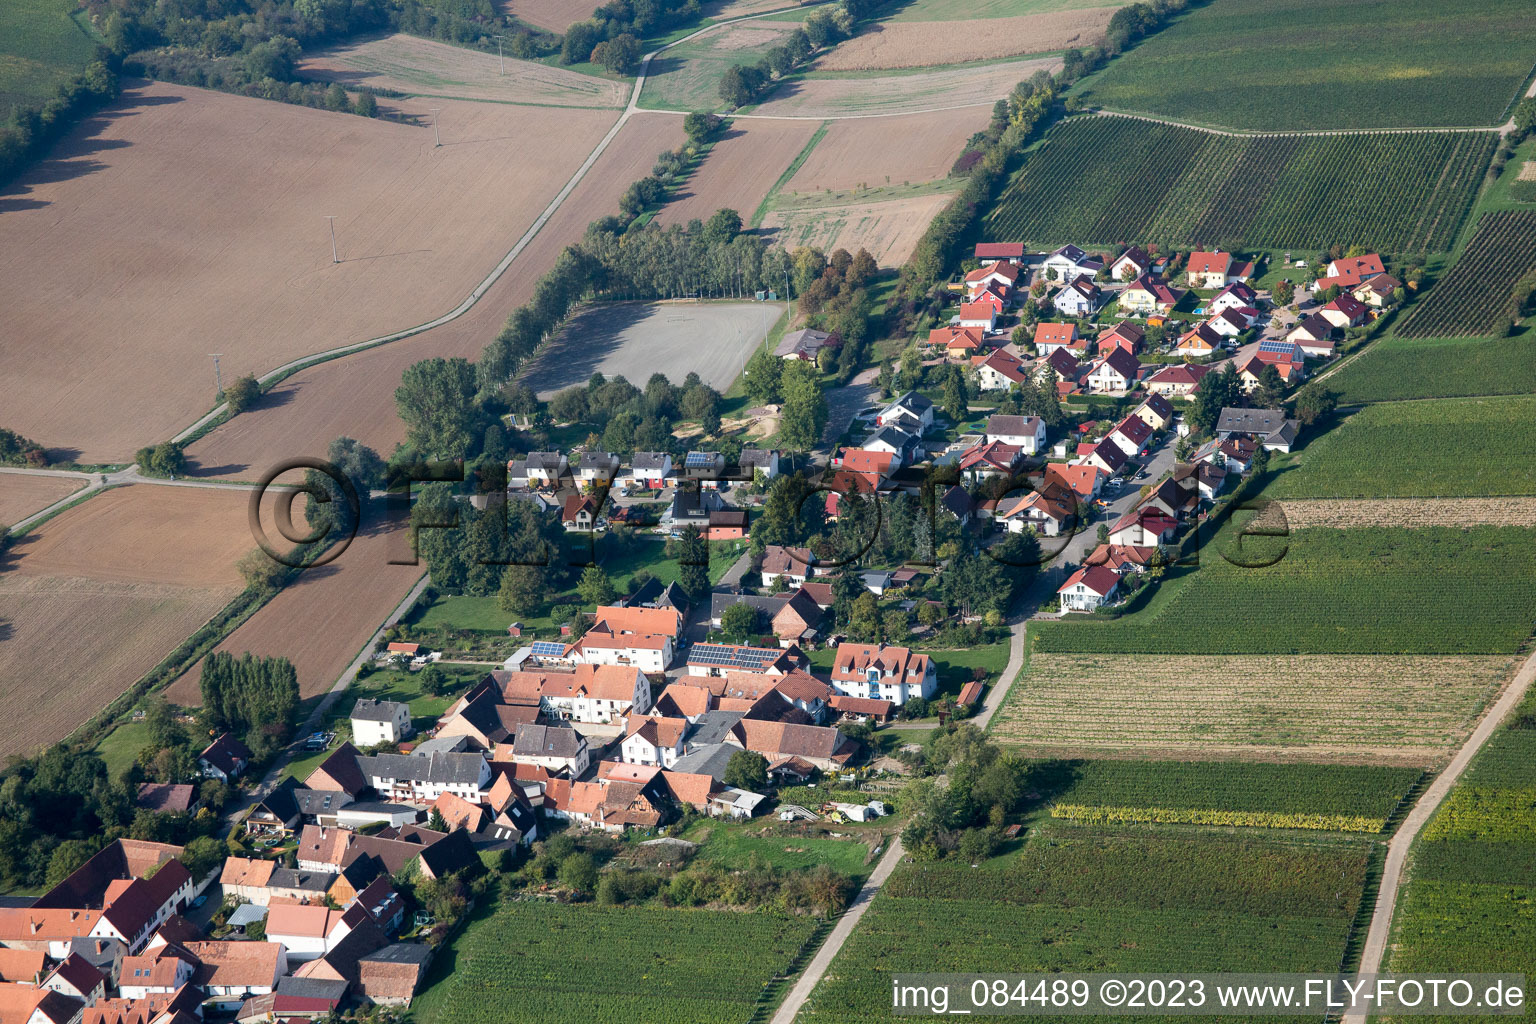 Niederhorbach in the state Rhineland-Palatinate, Germany out of the air